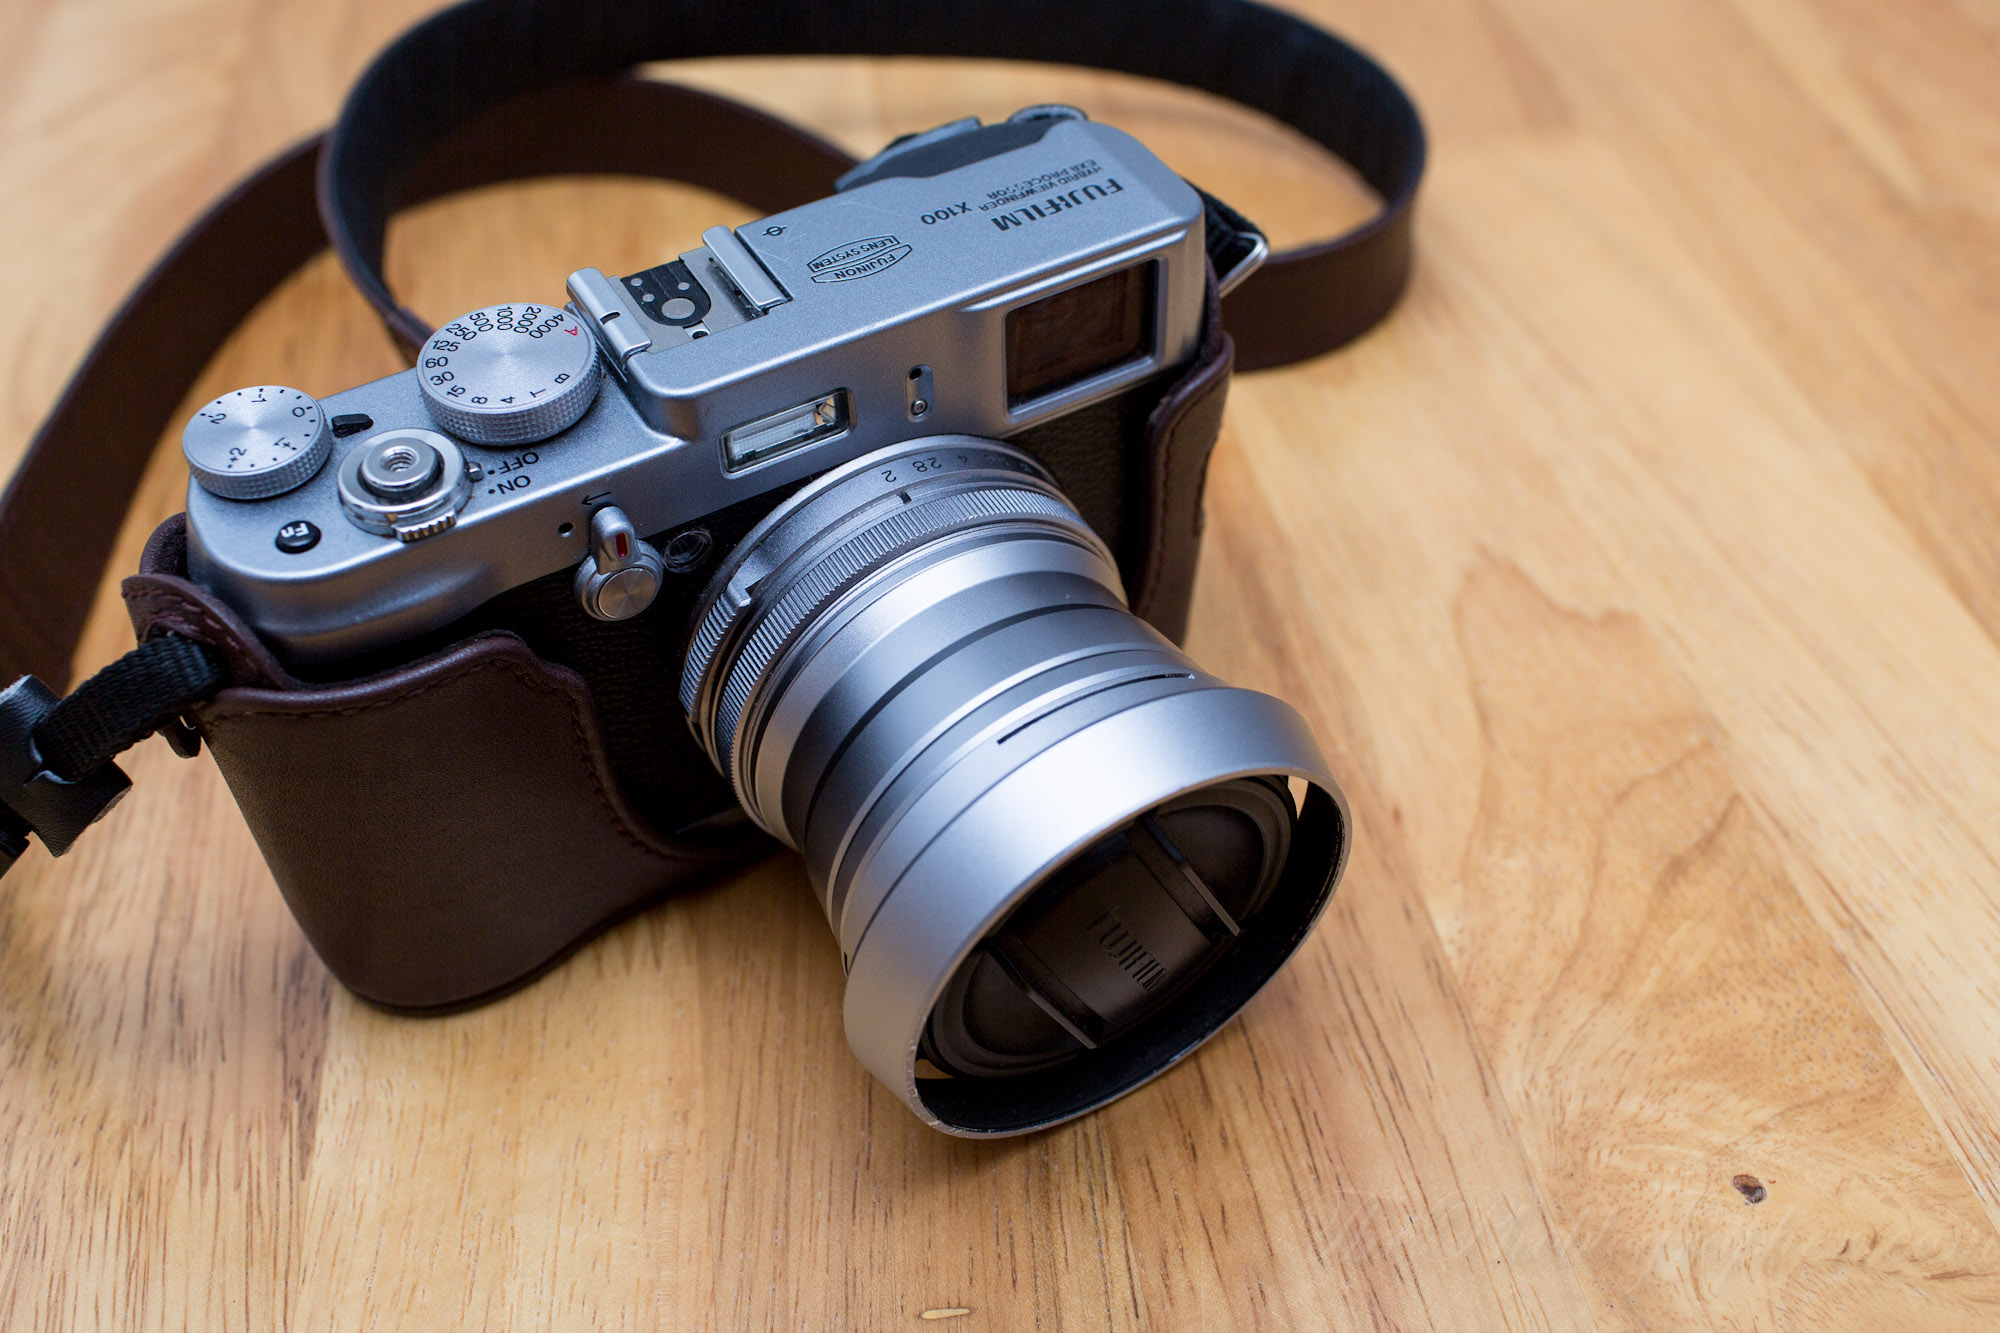 Reports Confirmed As False: The Fujifilm X100 Is Not Discontinued - Phoblographer